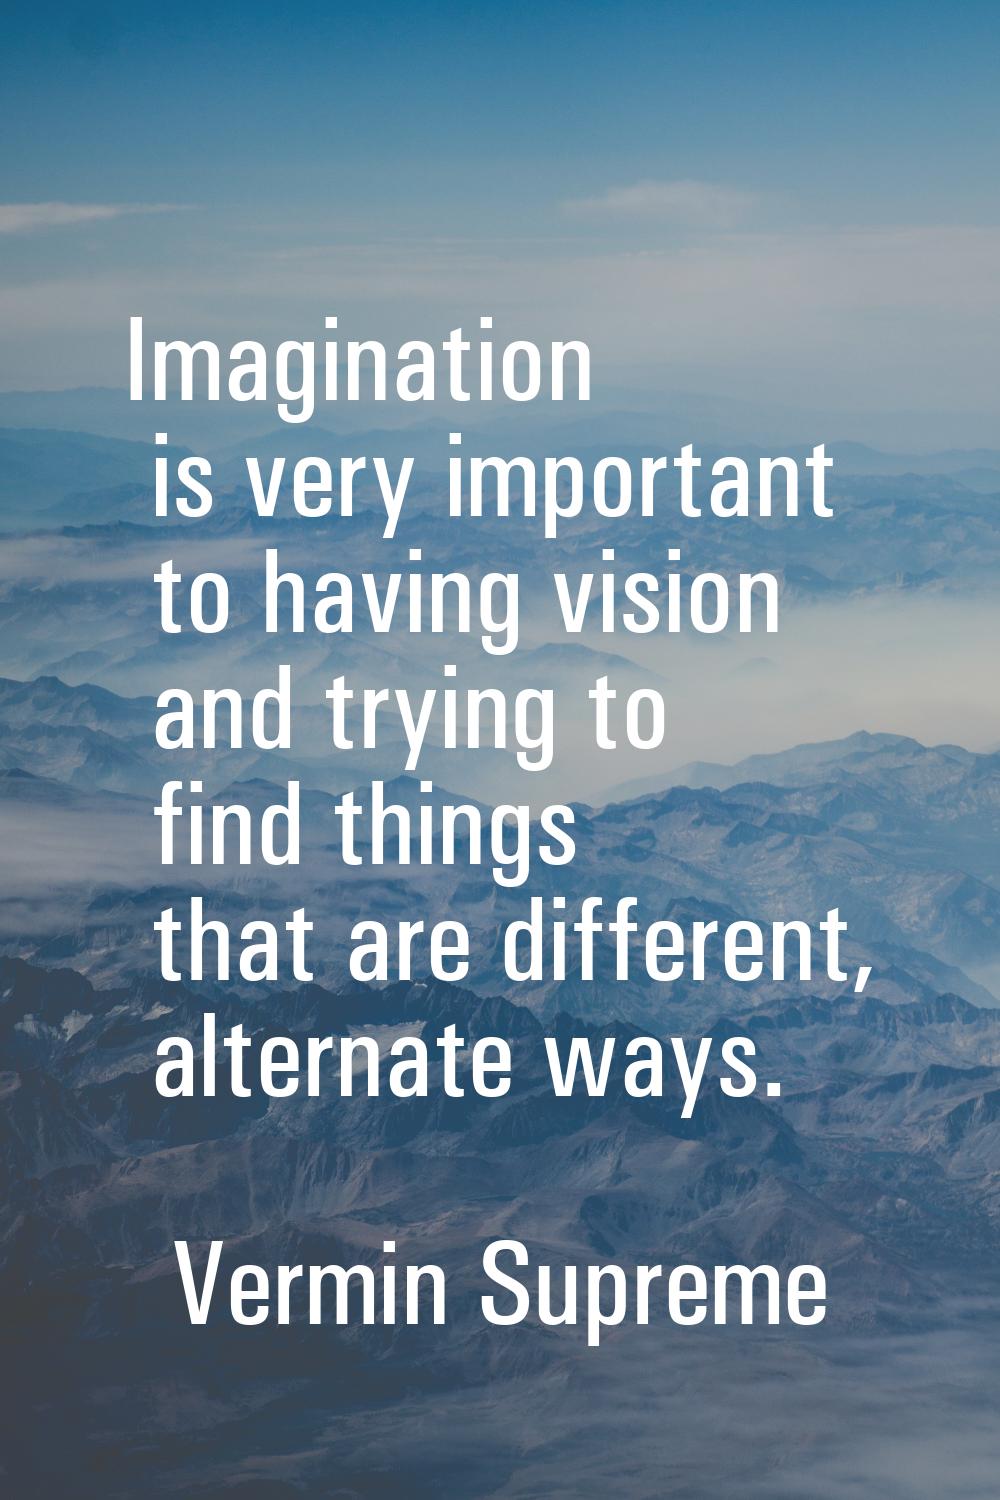 Imagination is very important to having vision and trying to find things that are different, altern